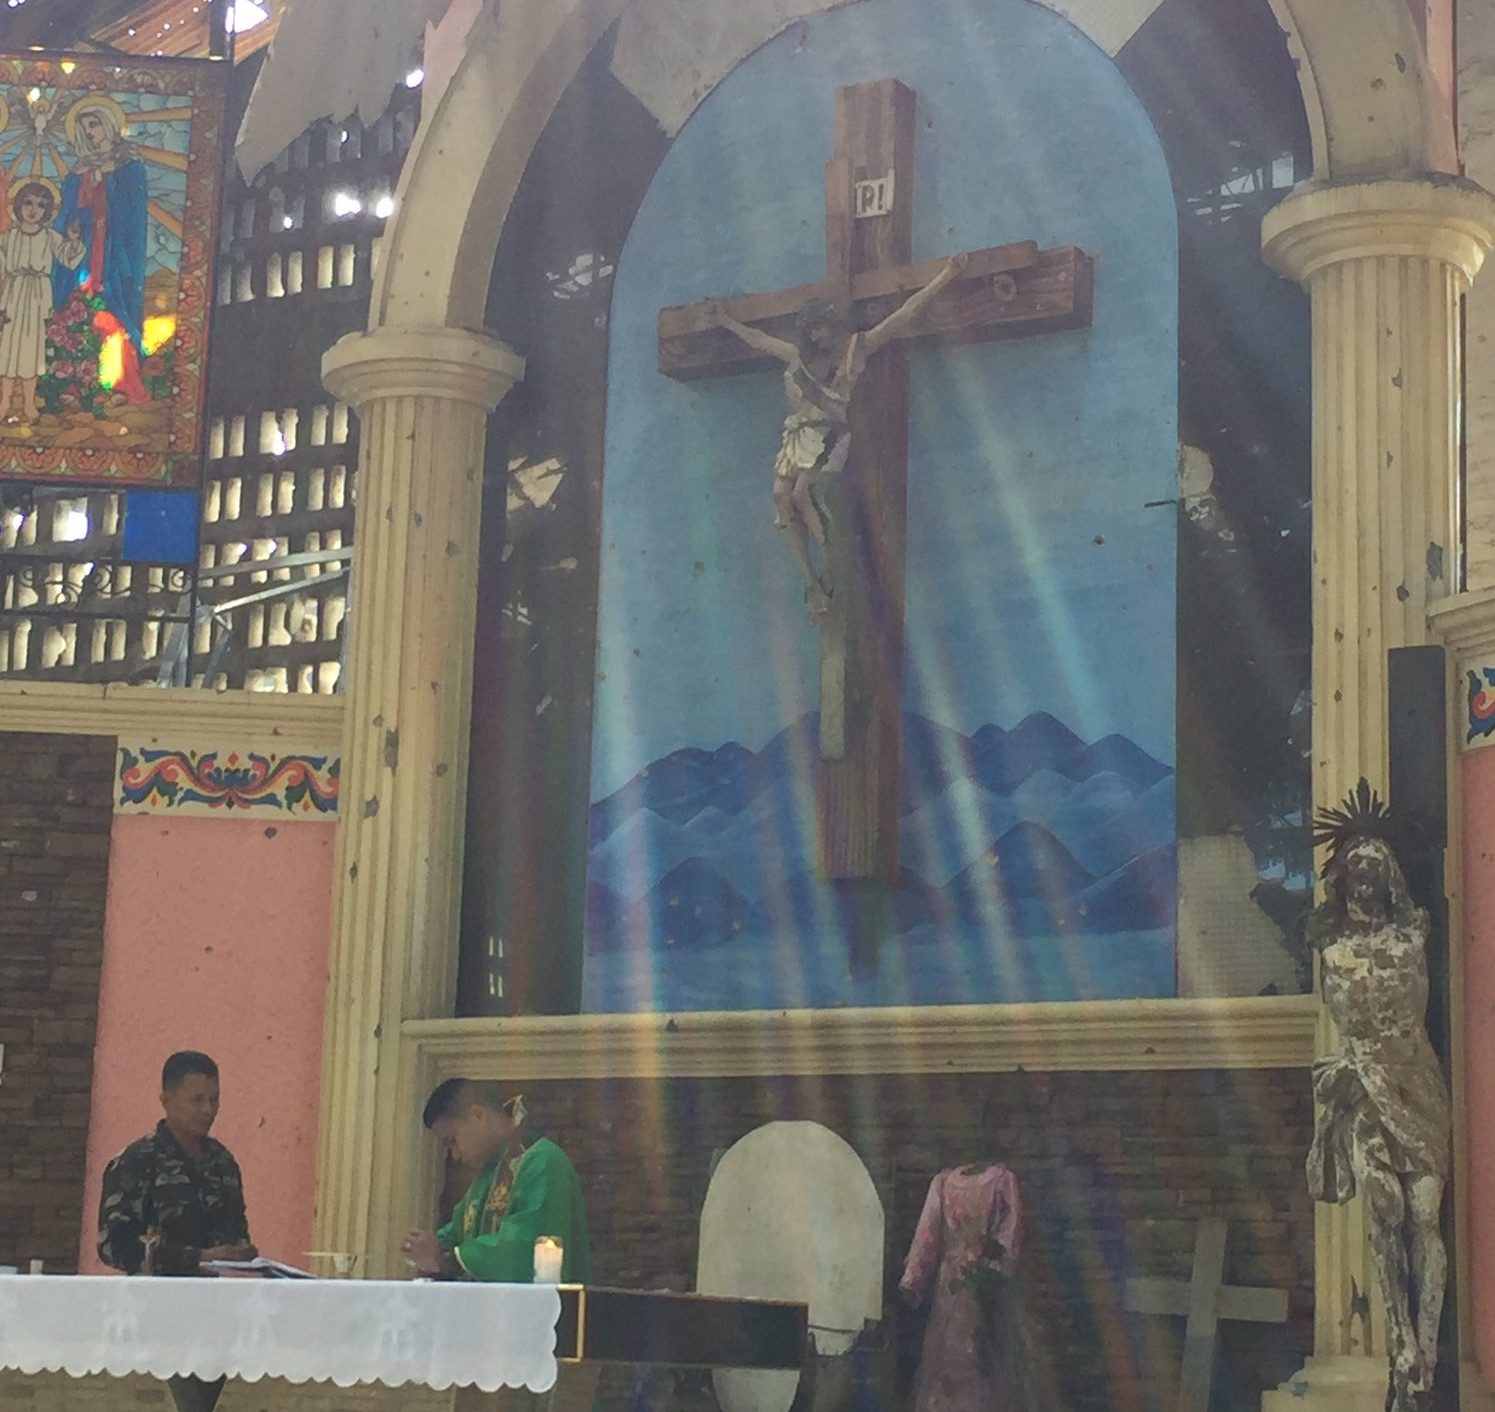 Mass celebrated again in Marawi cathedral, first since war erupted